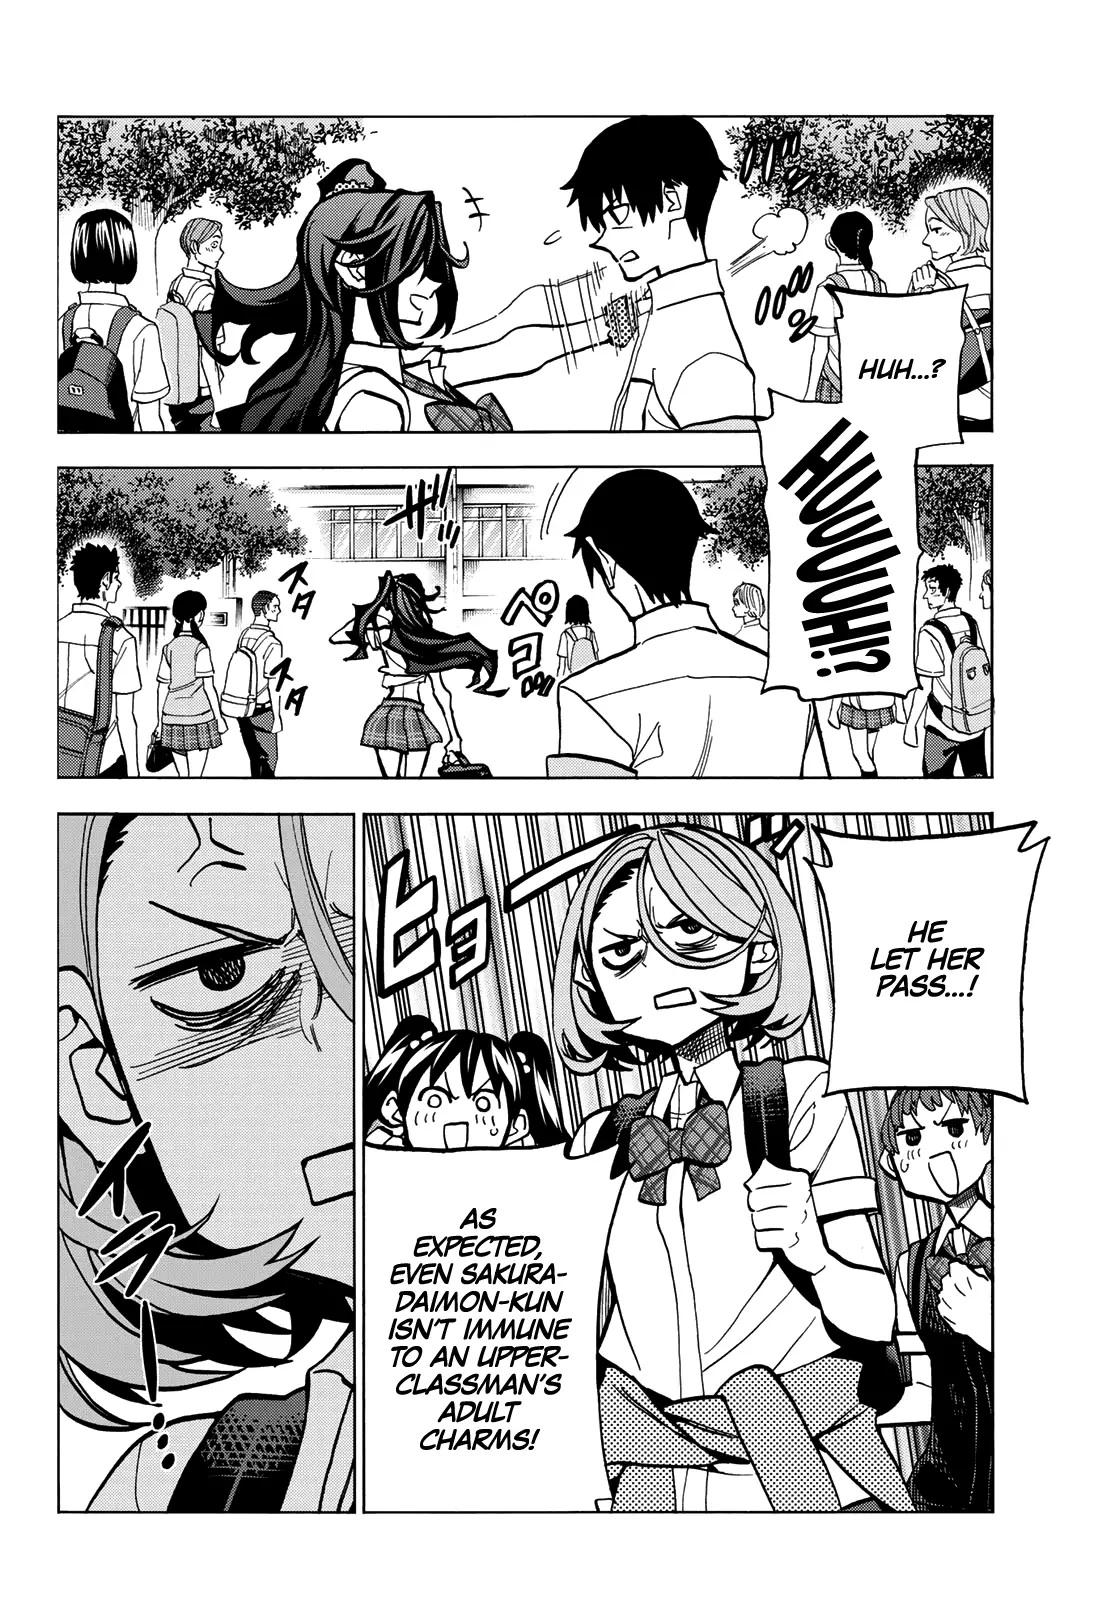 The Story Between A Dumb Prefect And A High School Girl With An Inappropriate Skirt Length - 7 page 6